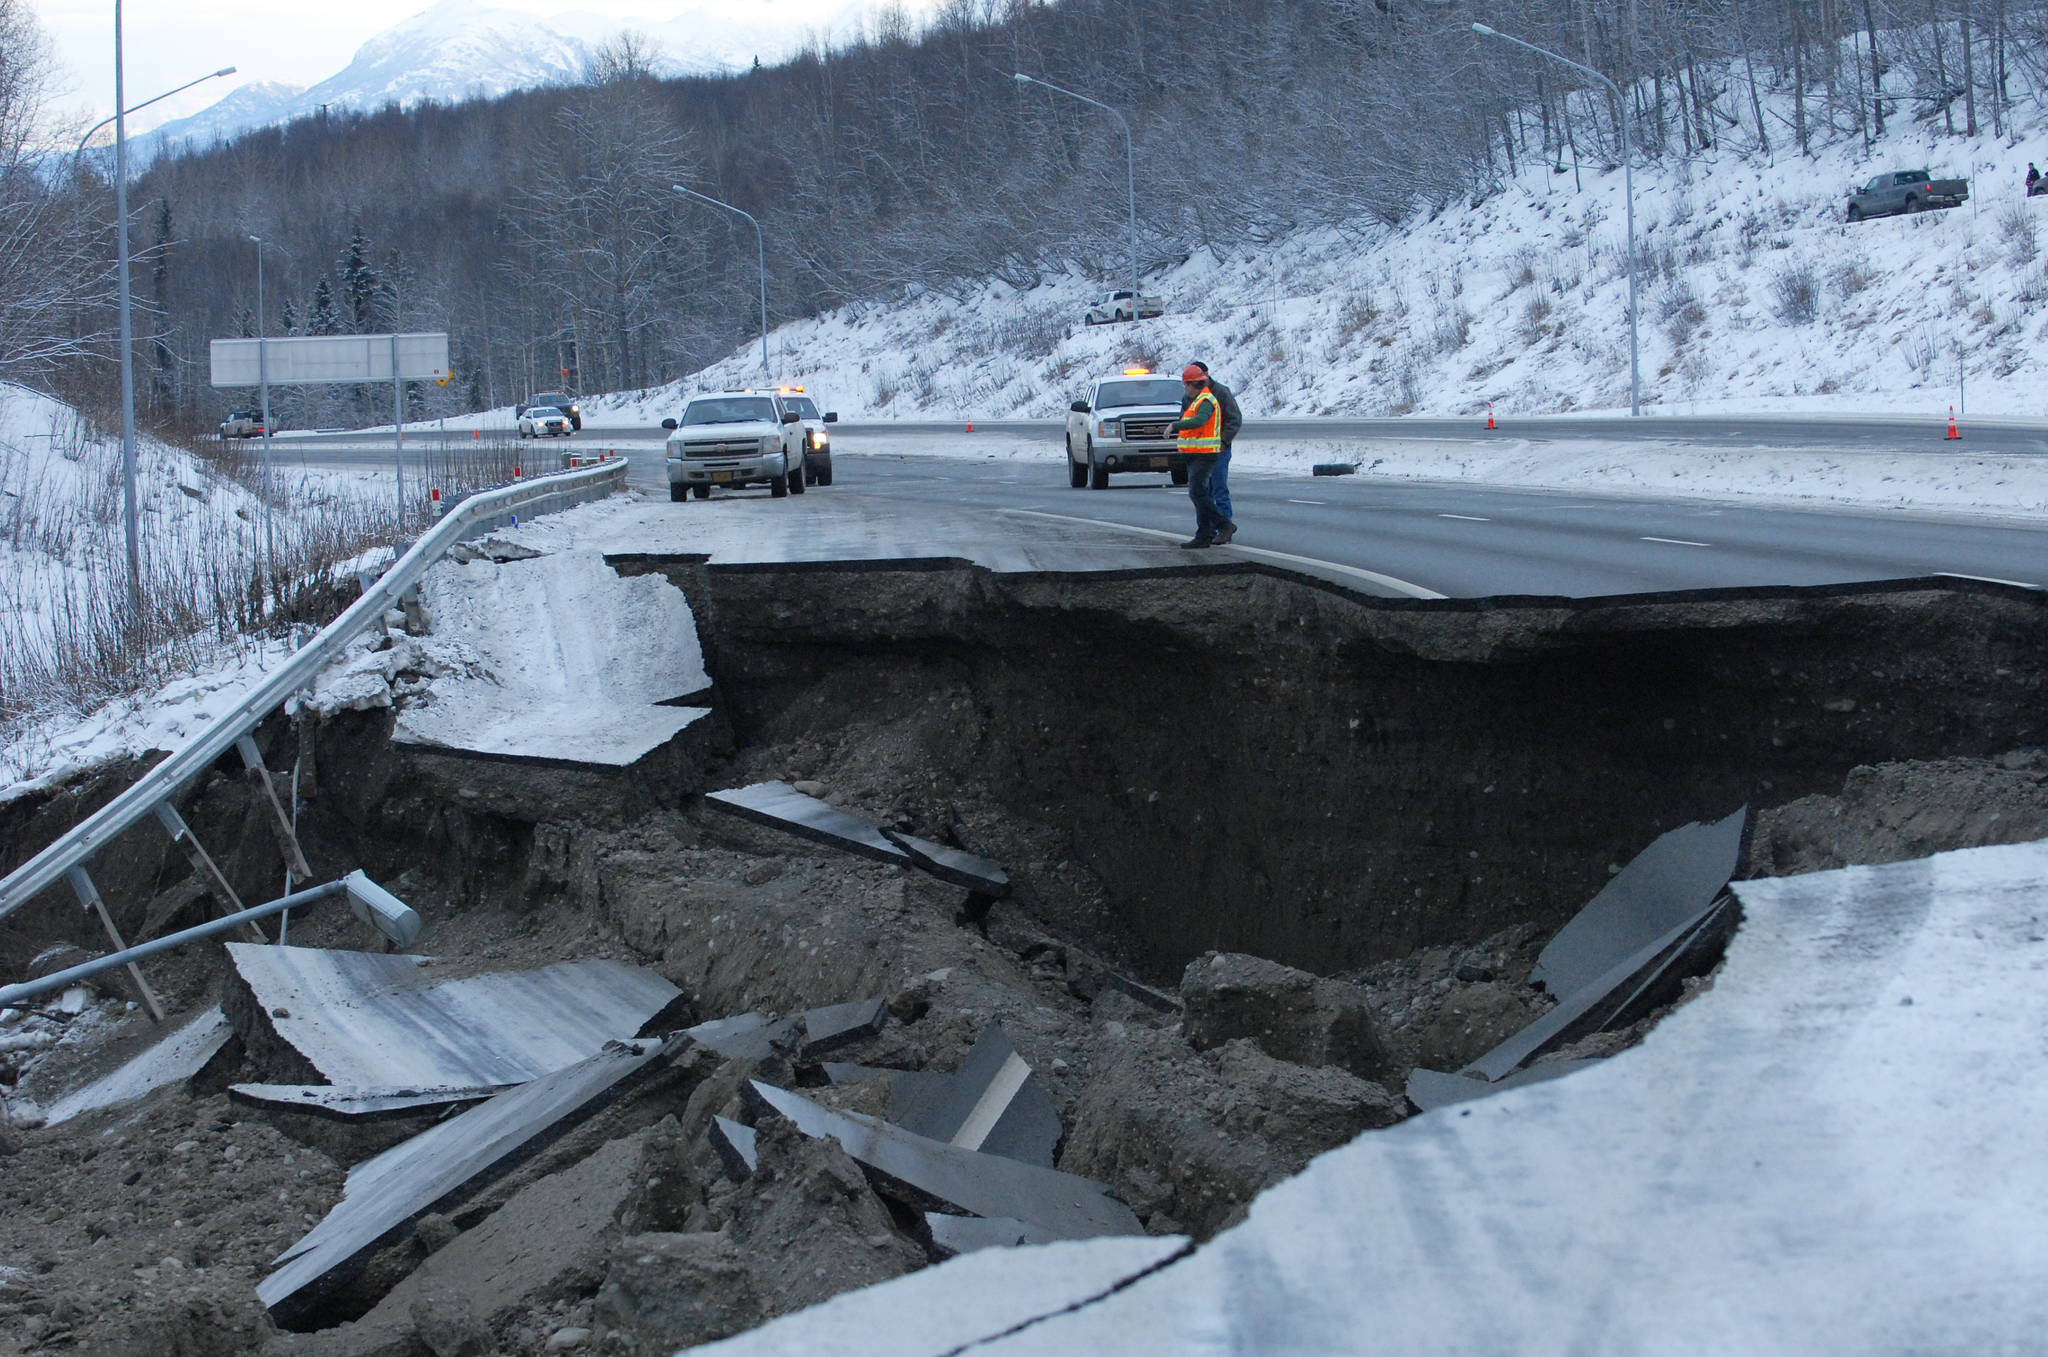 A section of the Glenn Highway damaged by Friday’s earthquake in Alaska. The road fell away between Eklutna and Mirror Lake. A Department of Transportation project manager said the damage will take several days to repair, but didn’t have an exact timeline. (Photo by Matt Tunseth/ADN)